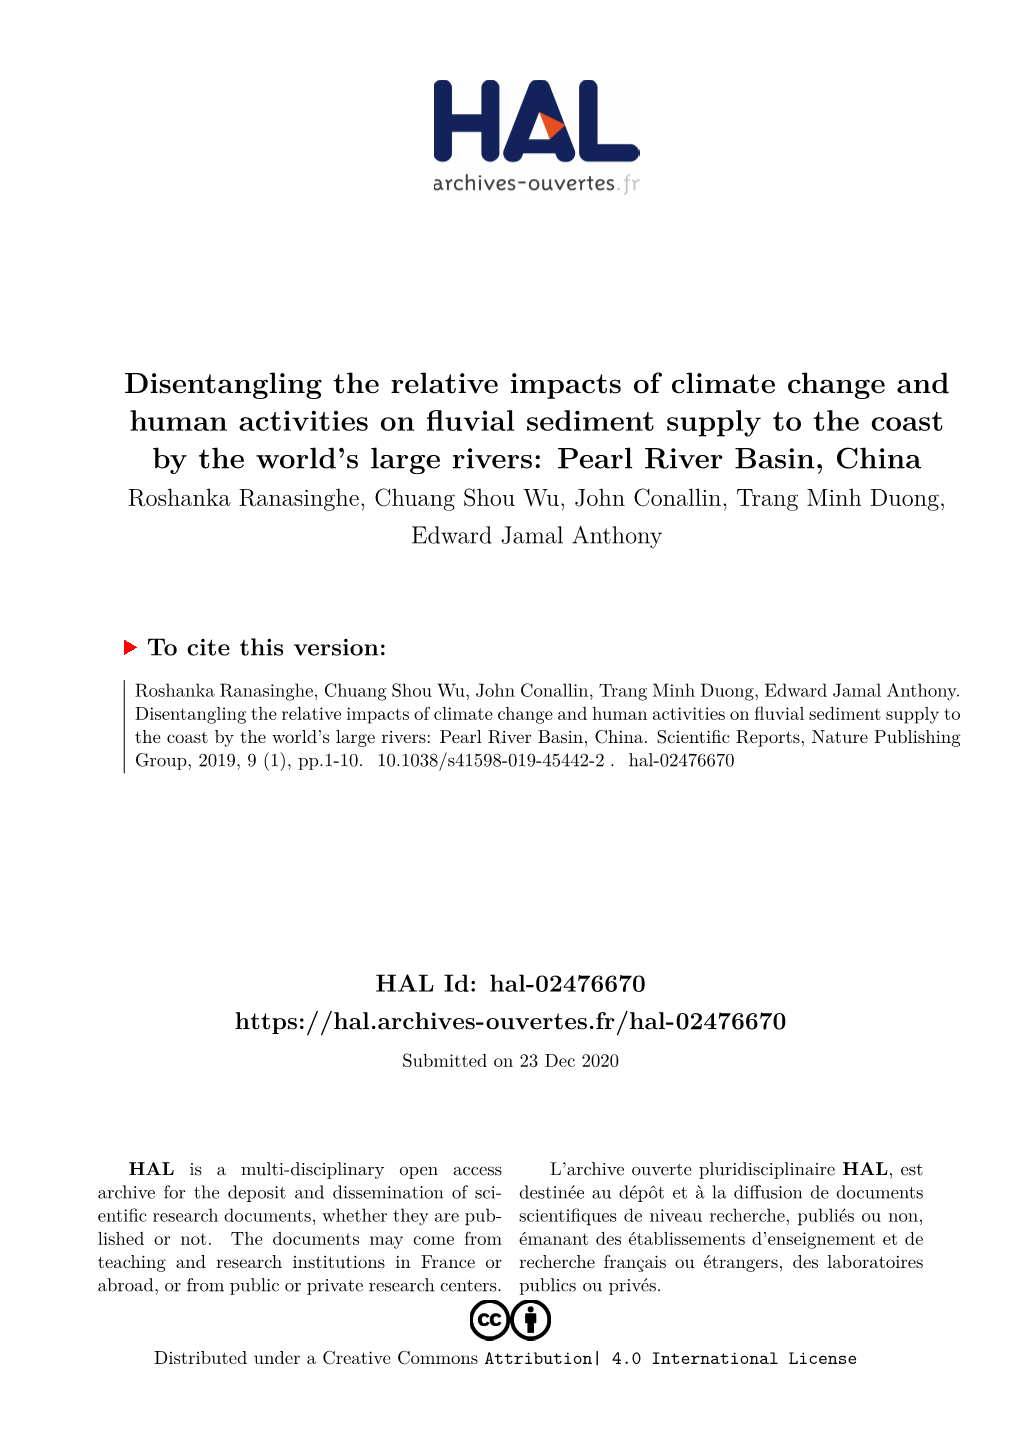 Disentangling the Relative Impacts of Climate